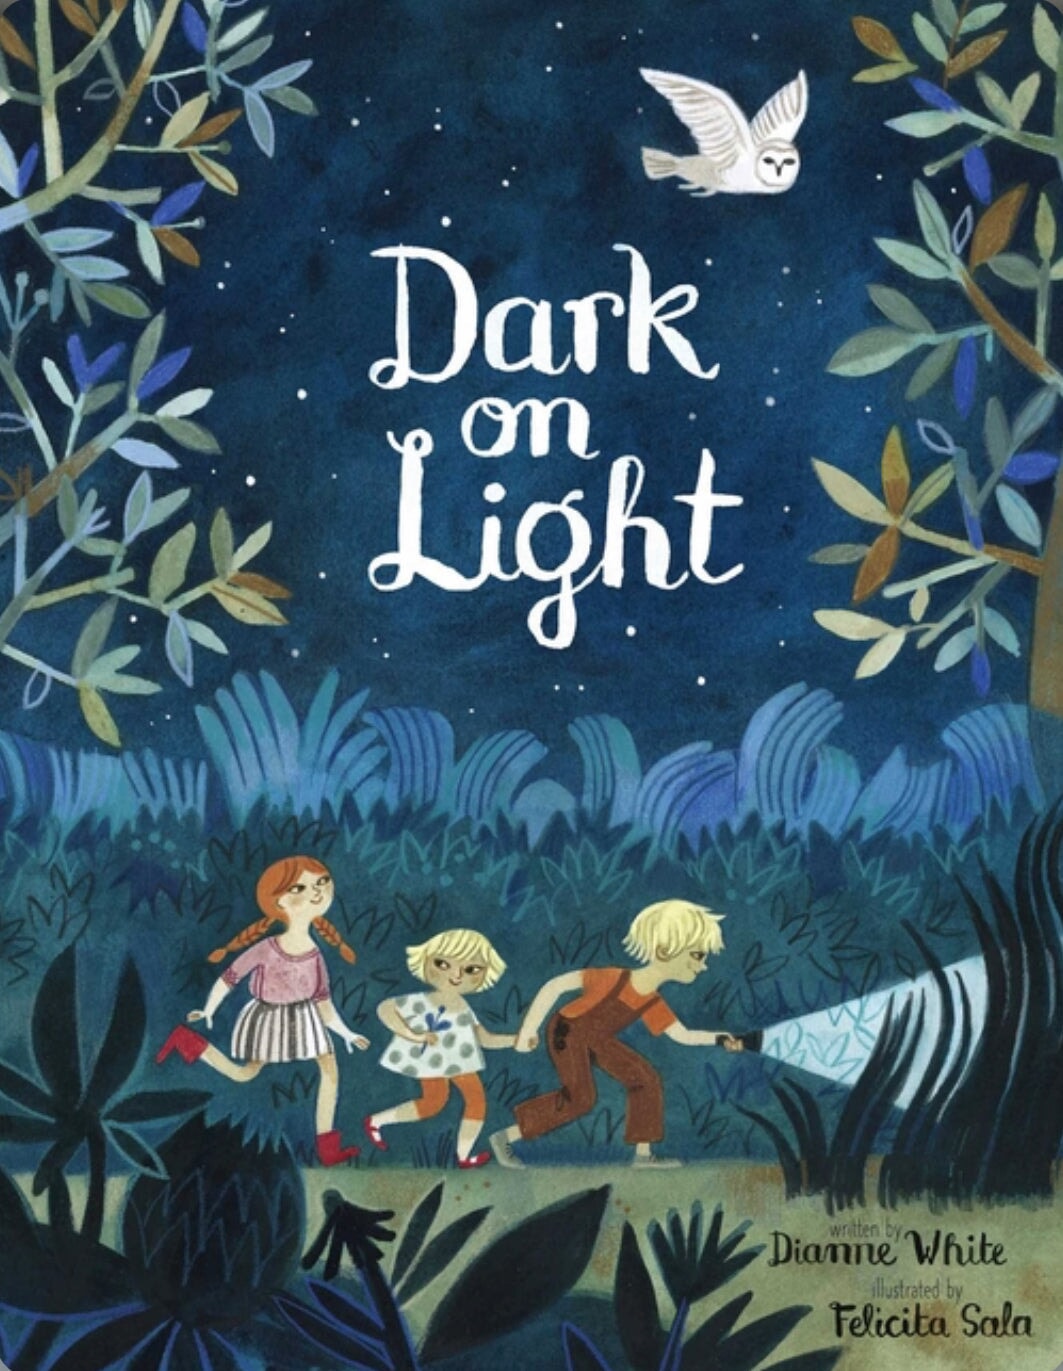 Dark on Light Picture Book about Nighttime Outdoors - Alder & Alouette